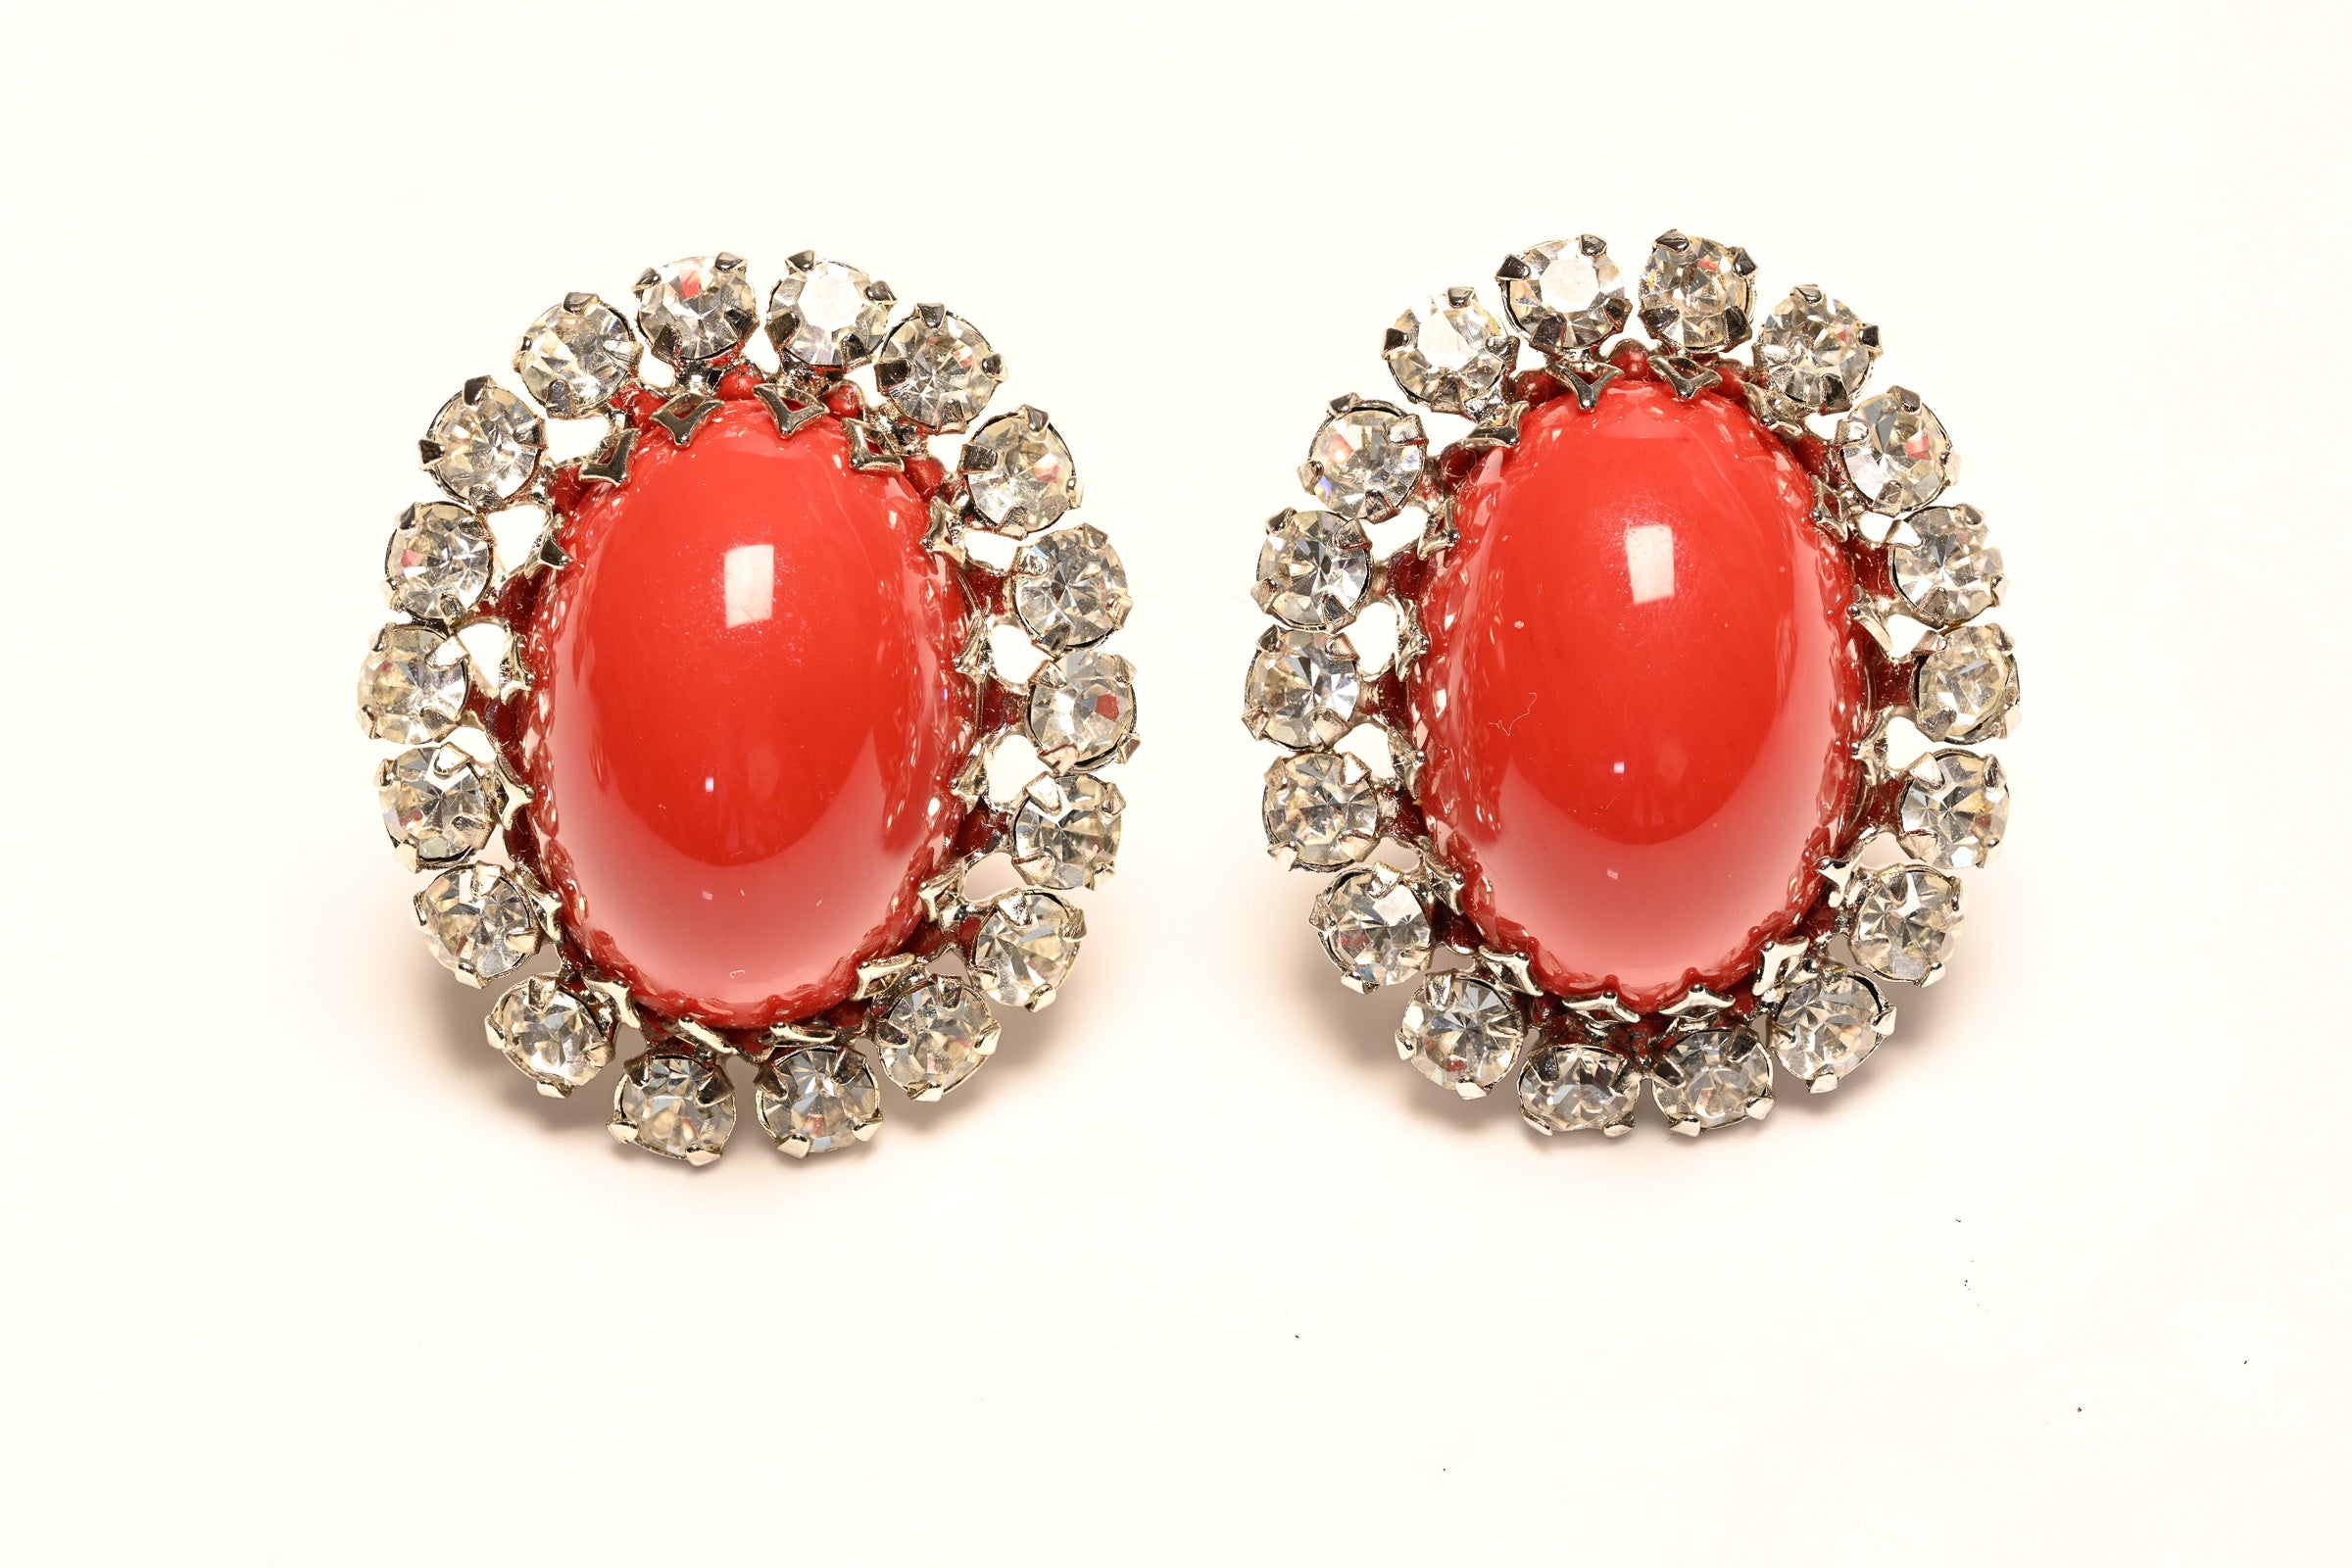 Vintage Schreiner NY Large Red Cabochon Dome Crystal Earrings